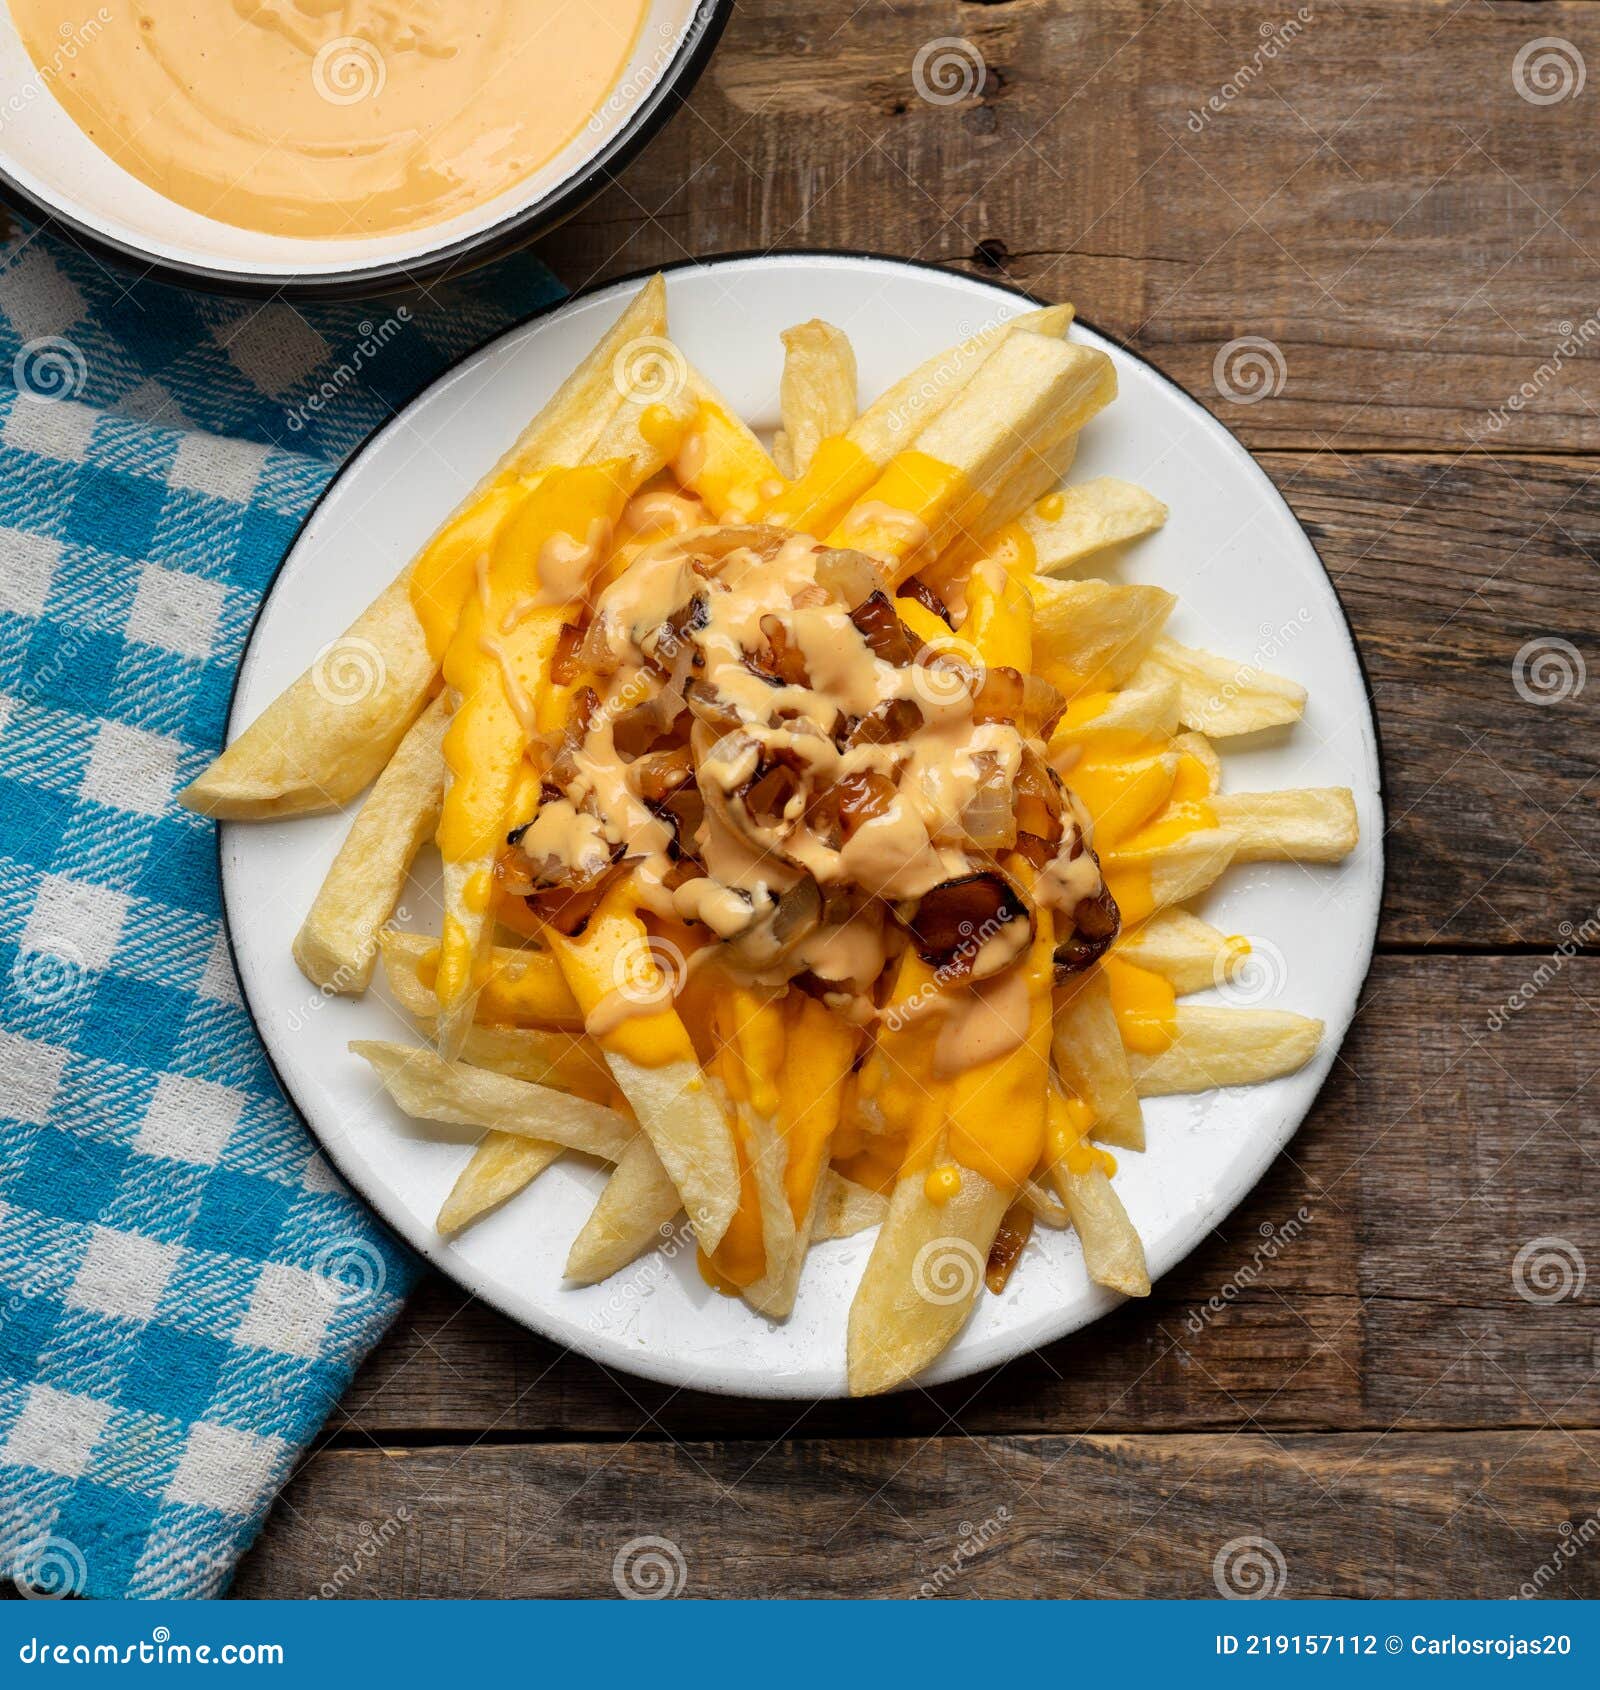 Animal Style Fries with Cheese and Caramelized Onion on Wooden Background  Stock Photo - Image of catsup, portion: 219157112